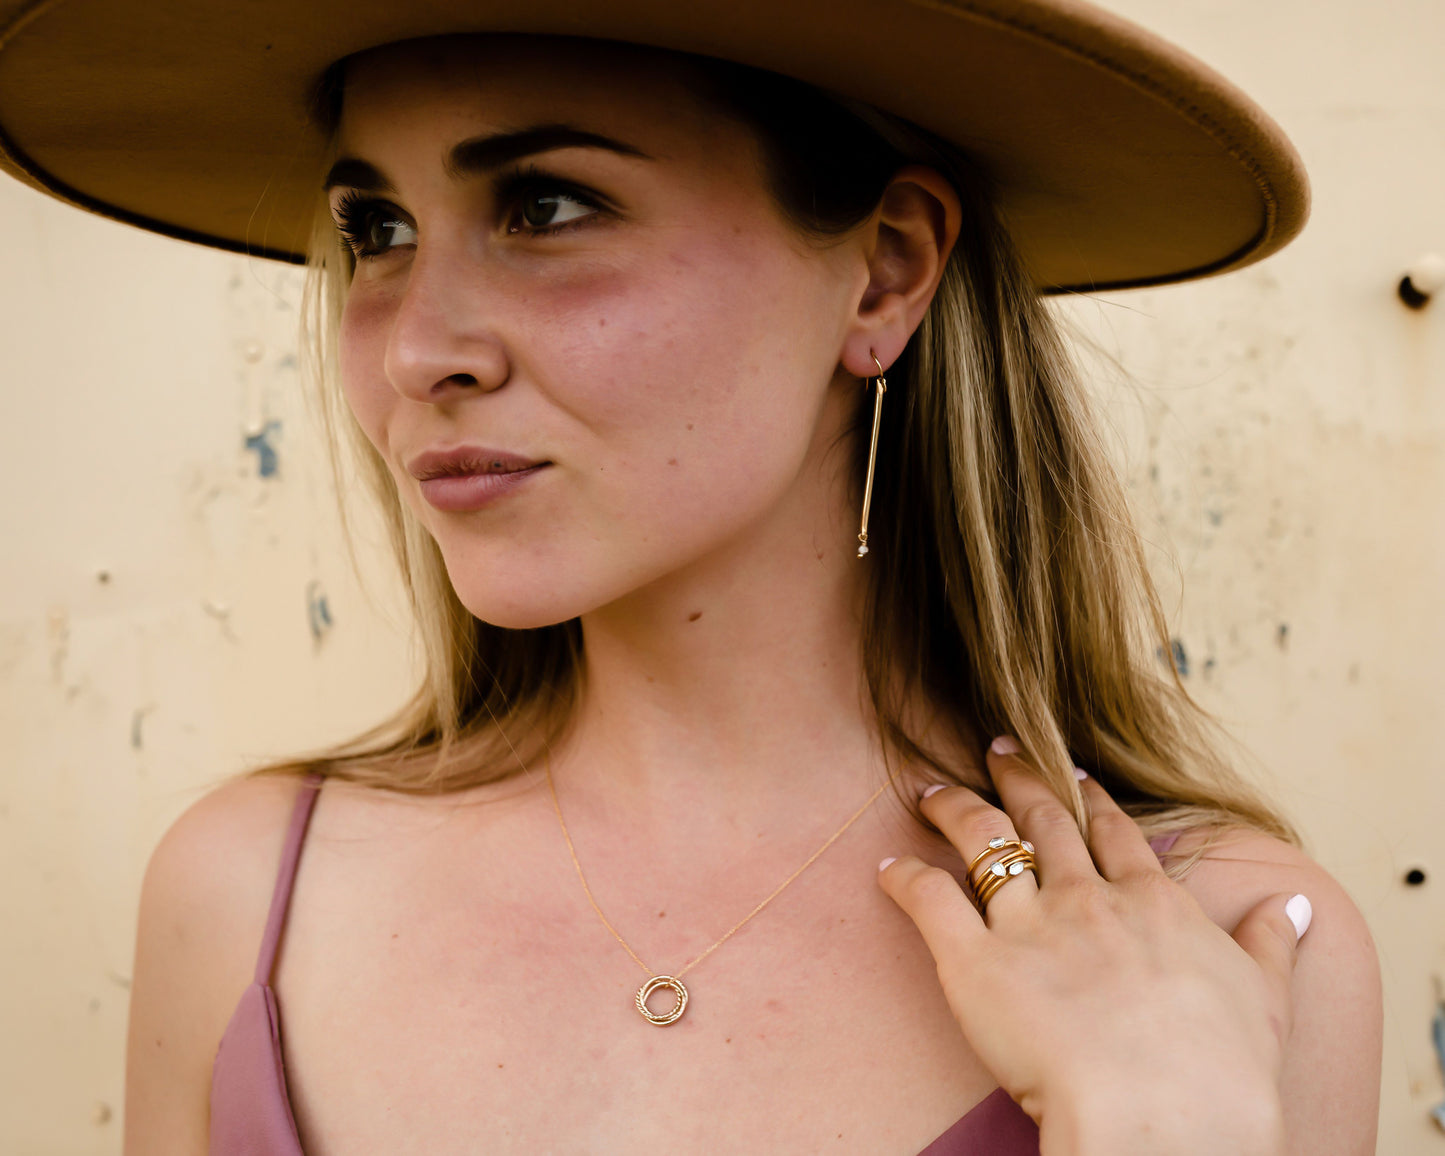 Model is showcasing the delicate bar earring personalized with birthstone in 14 karat gold filled. Handmade and handcrafted in fine metal, you select the stone to pair with your bar earrings for a truly custom pair of earrings. Great birthday gift.